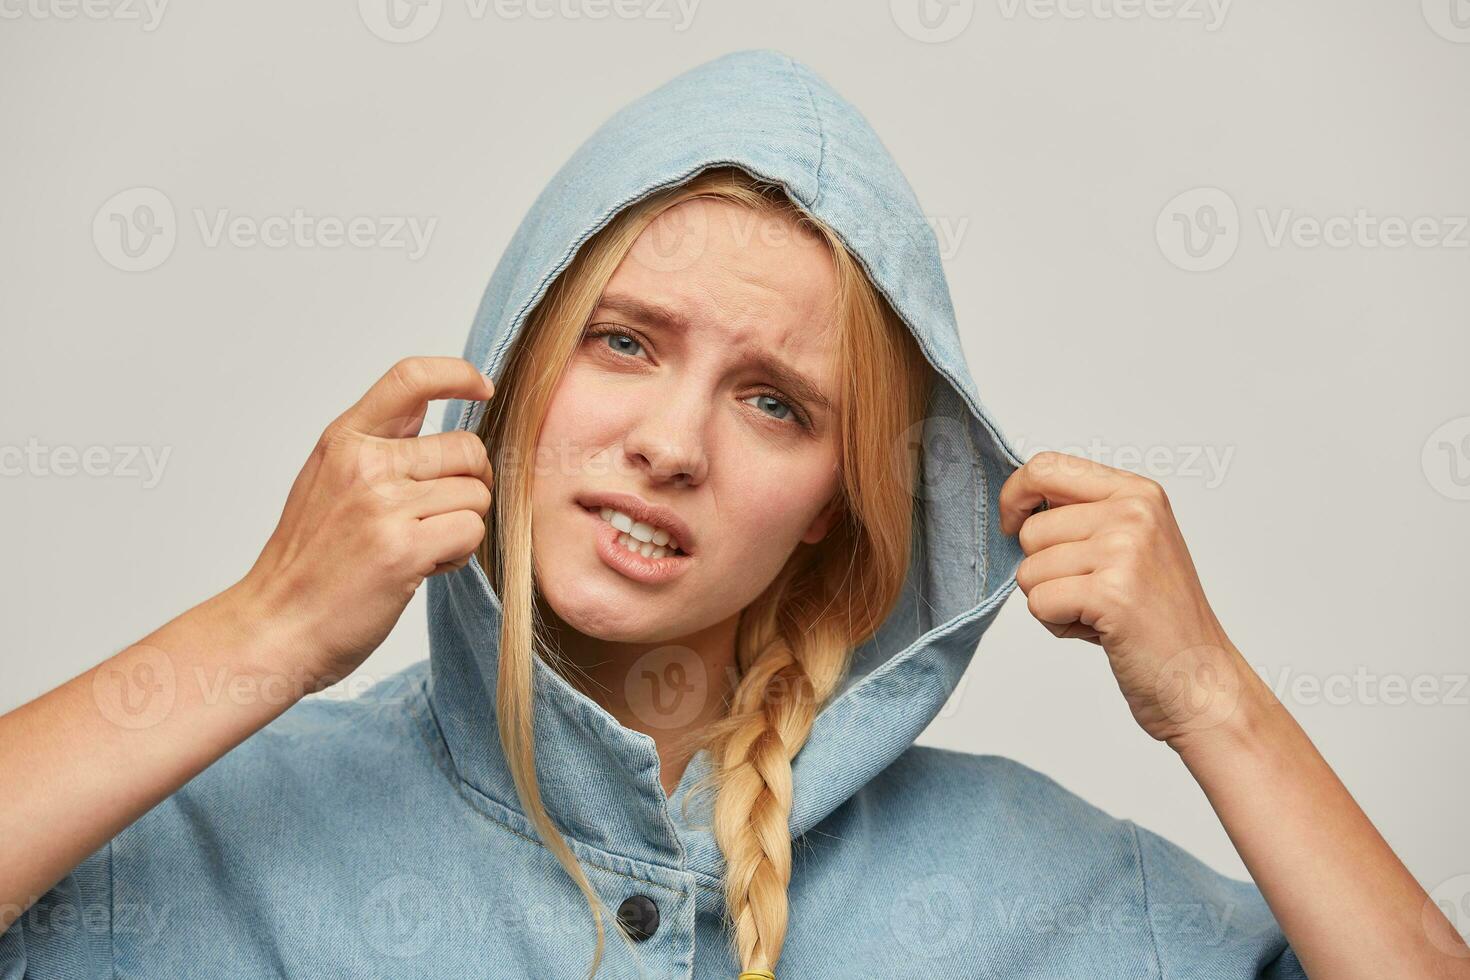 Portrait of beautiful blonde young girl, hands keep hood, looks distressed, wears jeans oversize coat, feeling upset about of bad autumn weather bites her lip isolated over white background photo